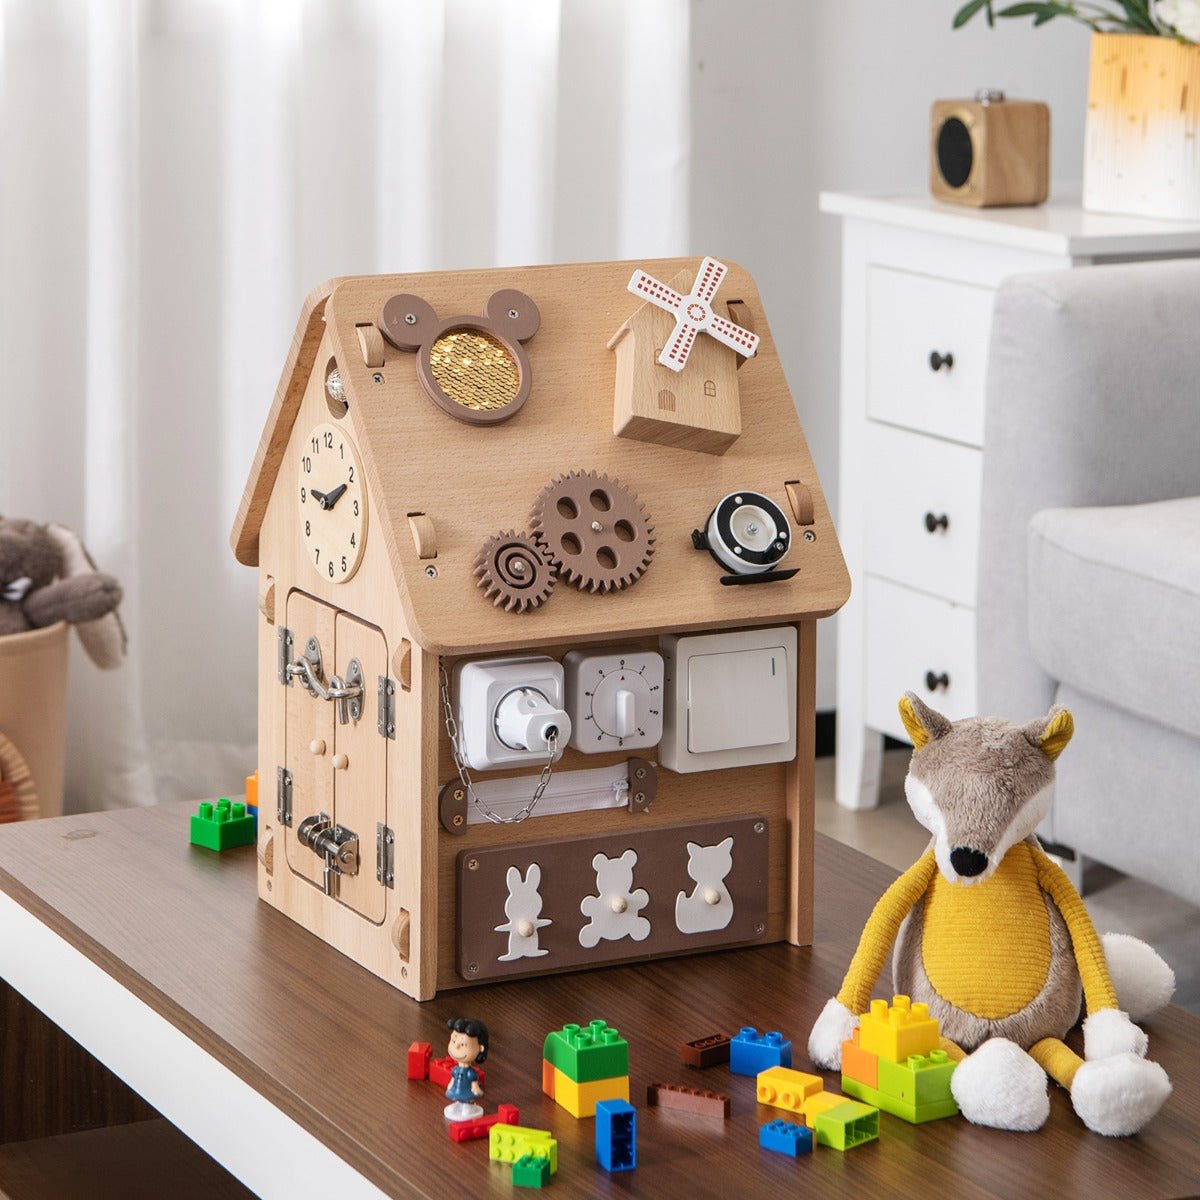 Busy House Fun: Where Imagination Comes to Life!